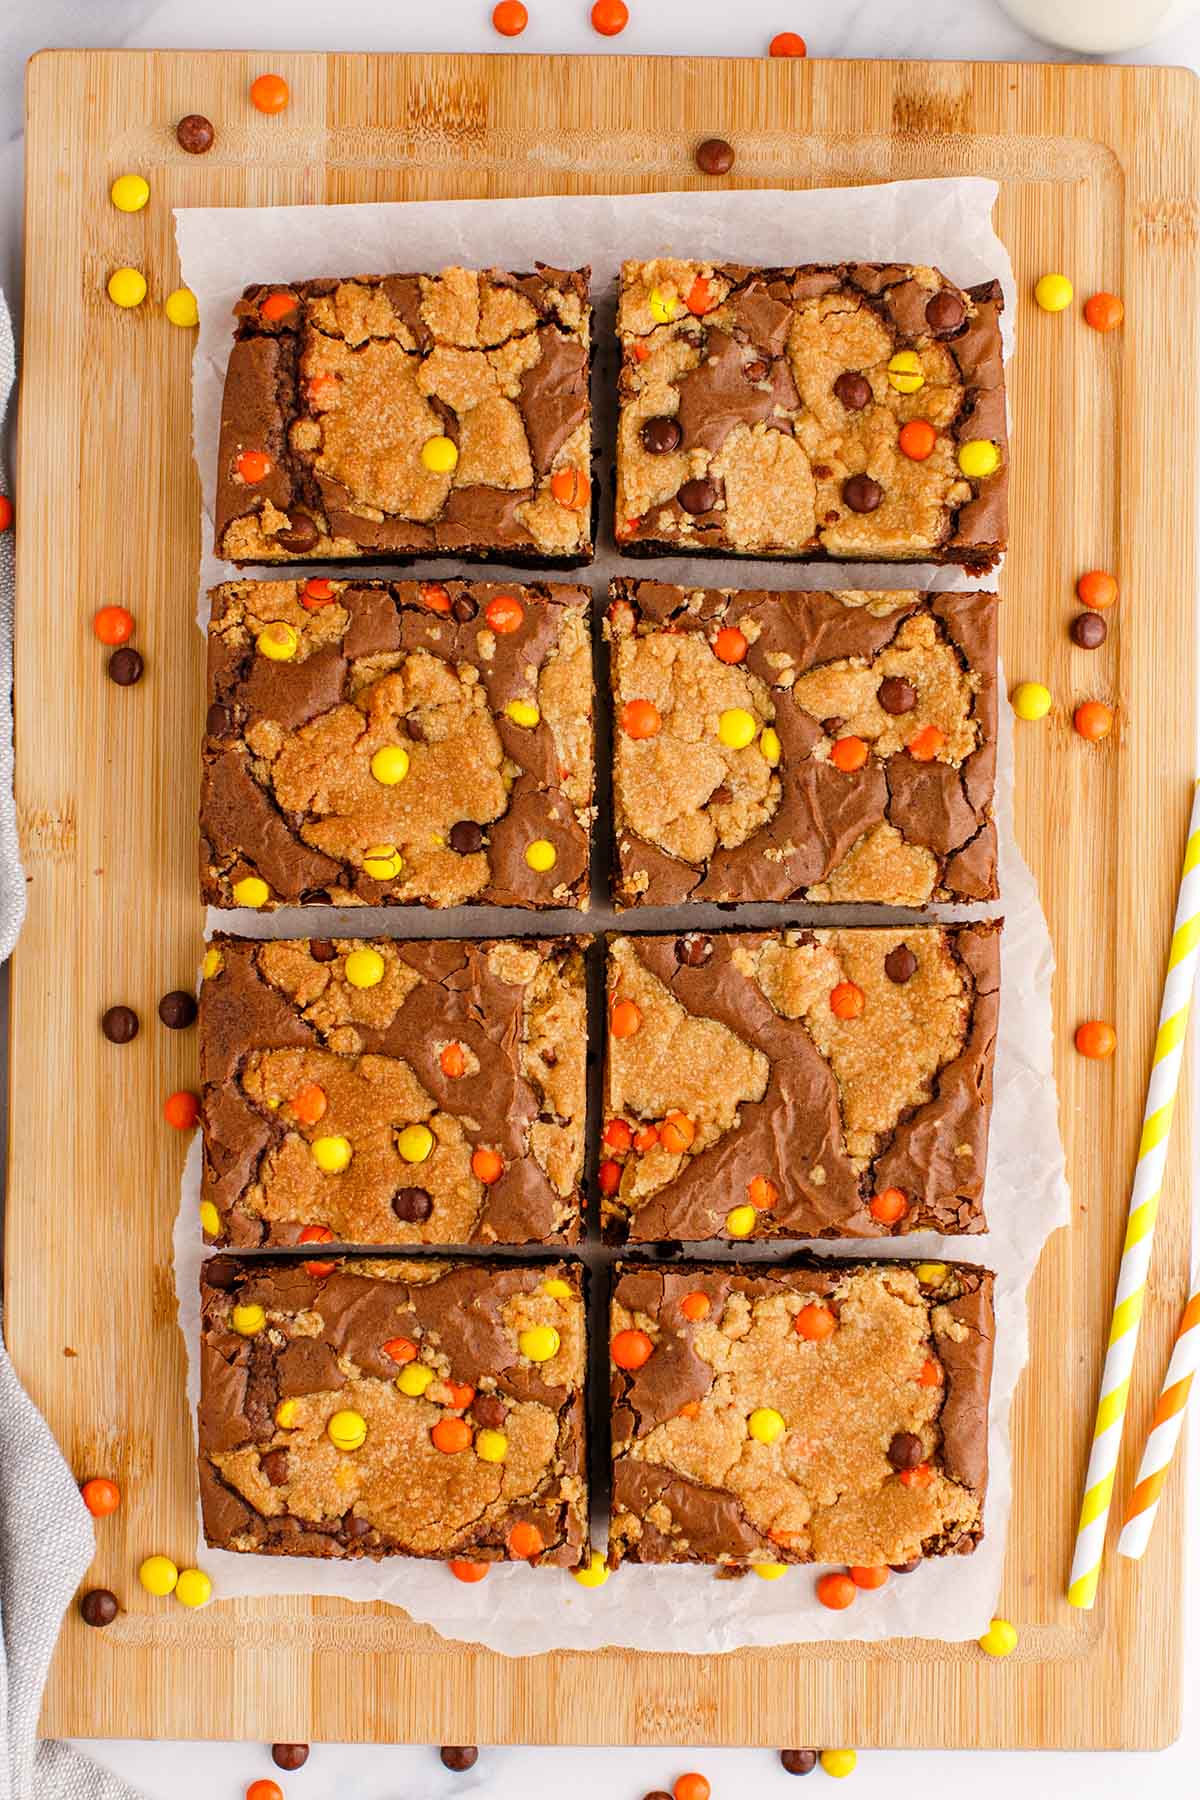 Peanut Butter Cookie Brownie Bars cut into squares